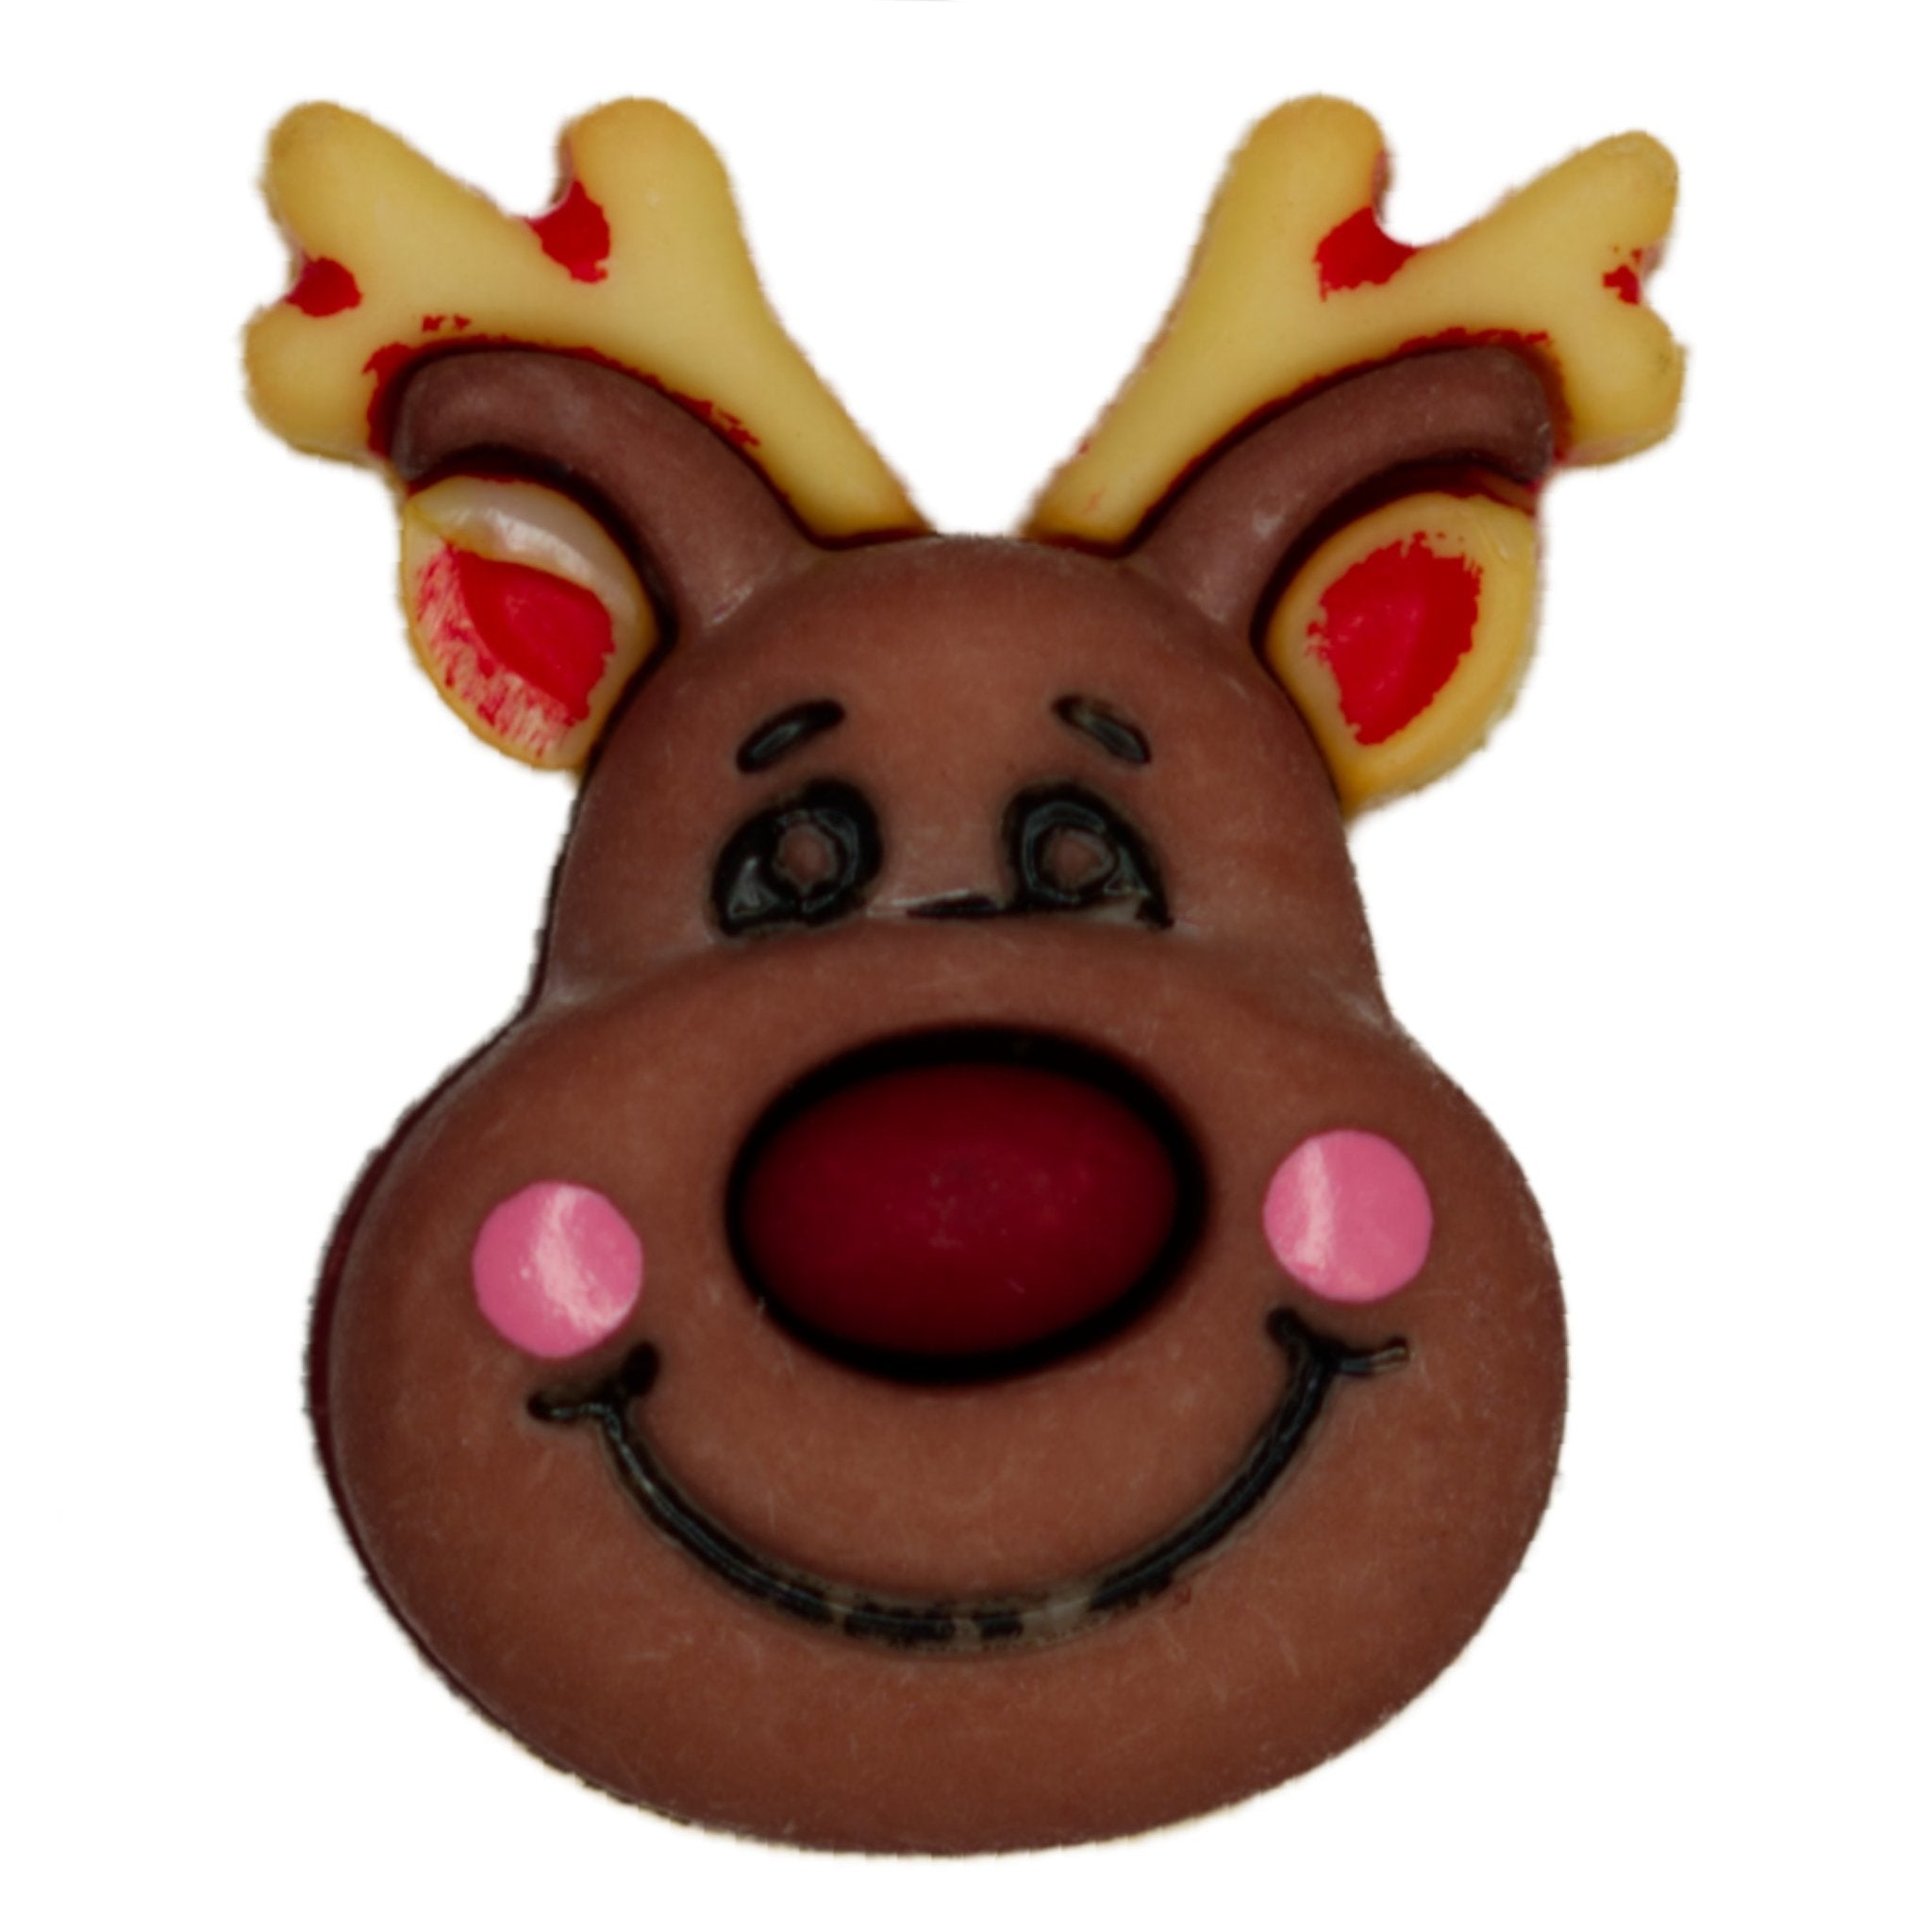 Reindeer - Buttons Galore and More